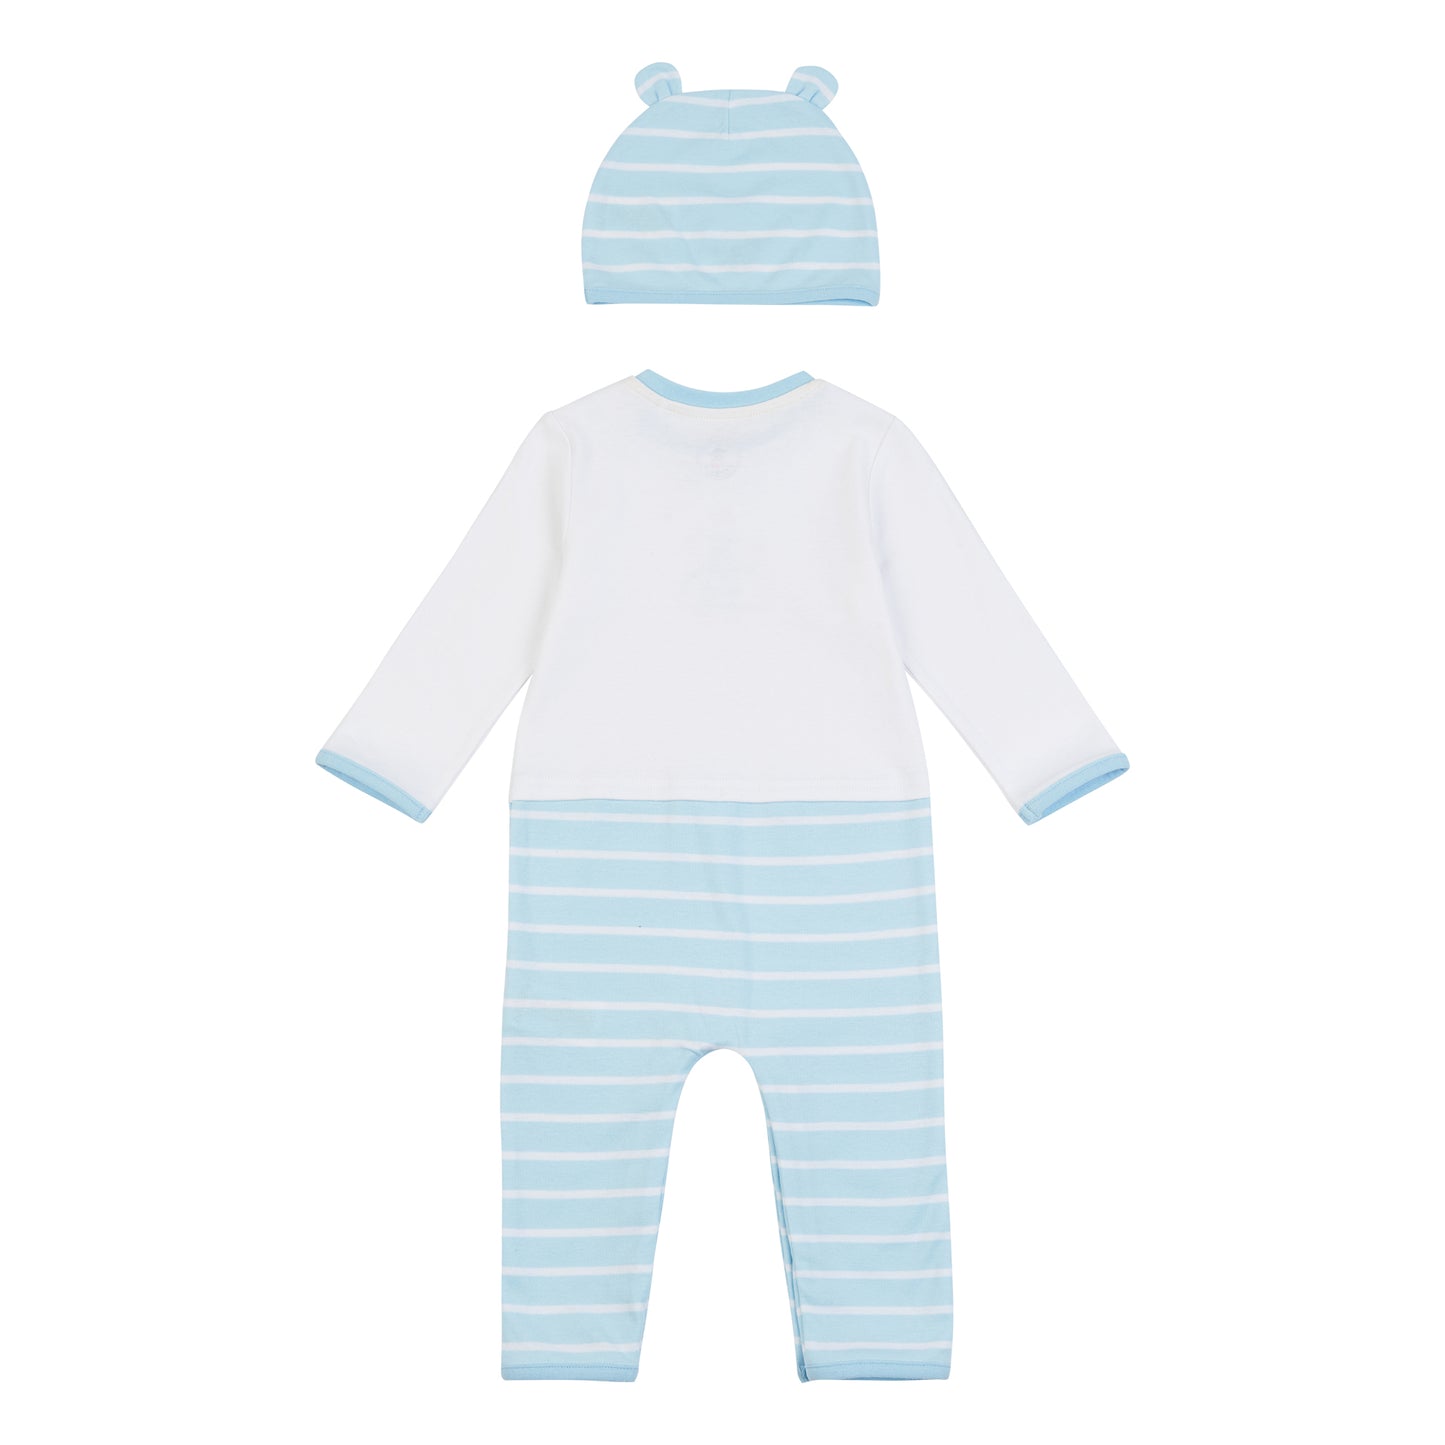 Penguin Boys Toddler 2 Piece Babygrow and Hat Set With Ears PGN0976002